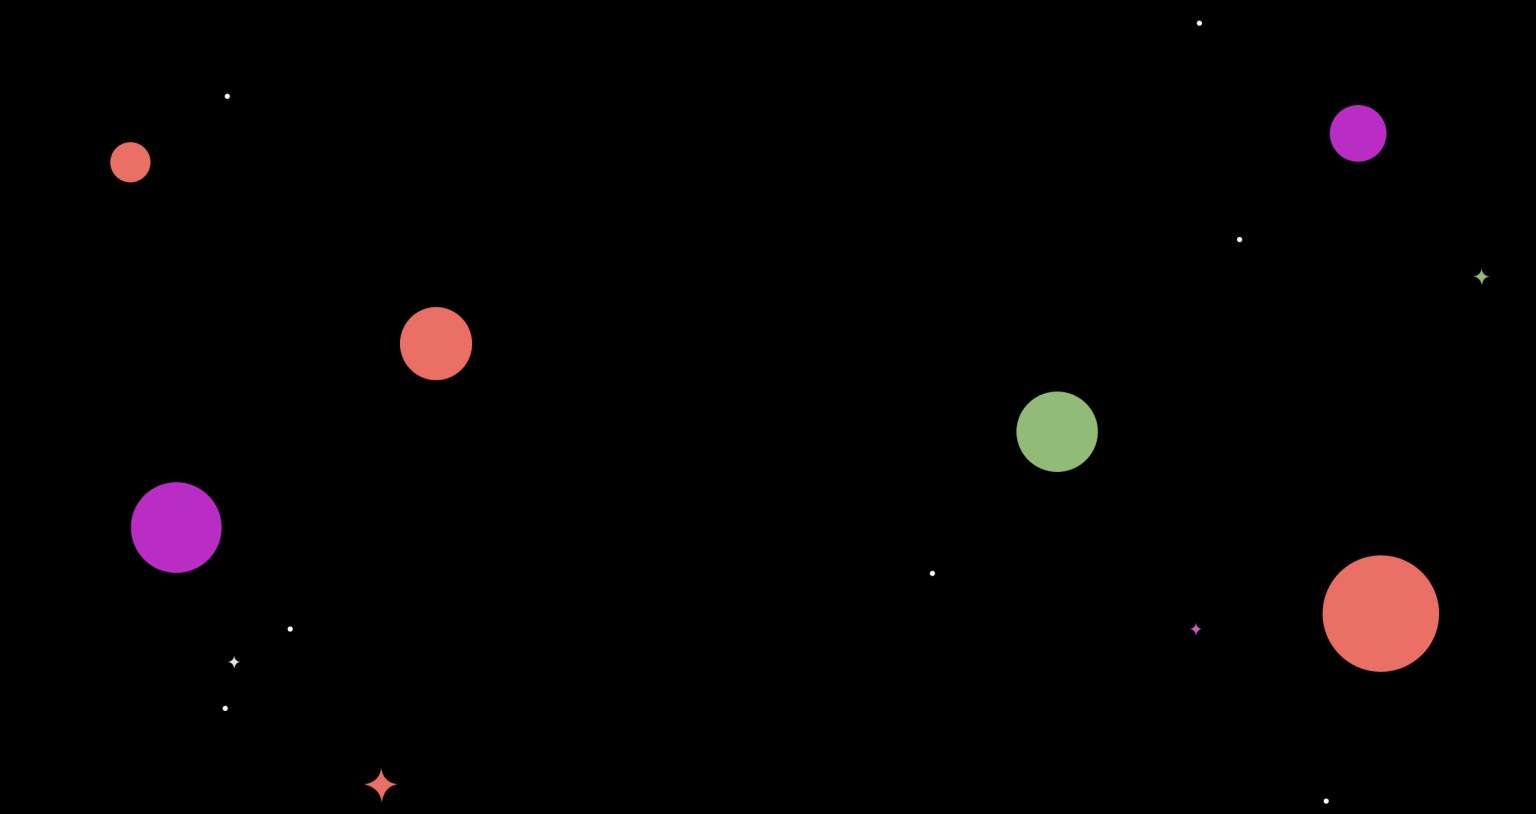 A group of colorful circles on a black background.